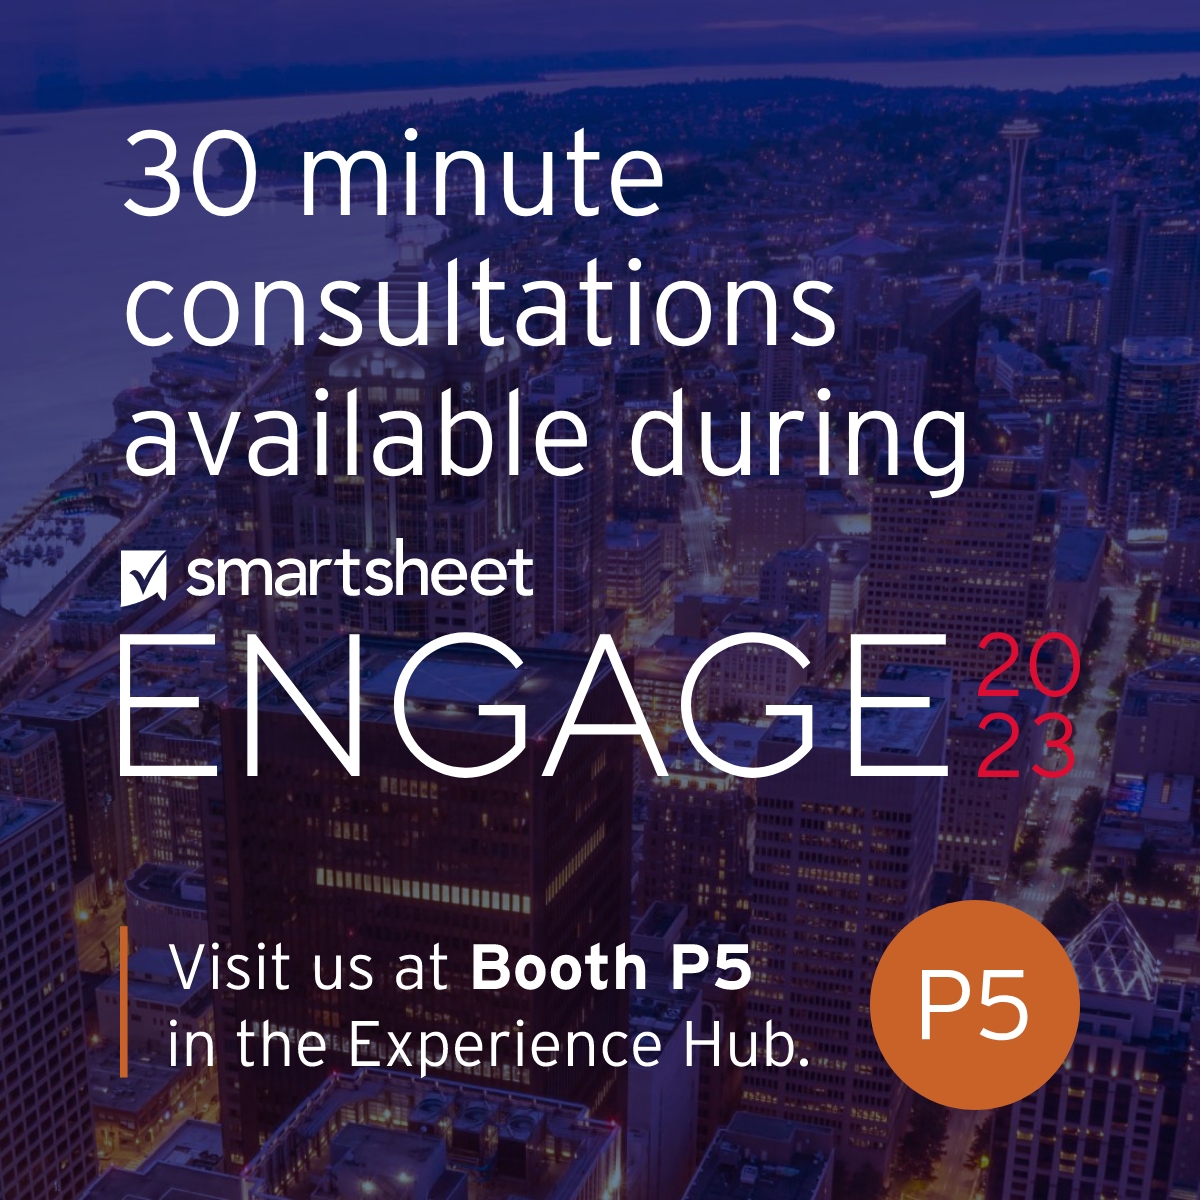 Don't miss out on free 1-2-1 support at #SmartsheetENGAGE 2023! 

Register for a FREE 30-min no-strings consultation where you can:
✅ Review a current solution
✅ Troubleshoot 
✅ Explore Premium Apps

And much more!

Register ➡️ app.smartsheet.com/b/form/fdec676…

#SmartsheetEngage